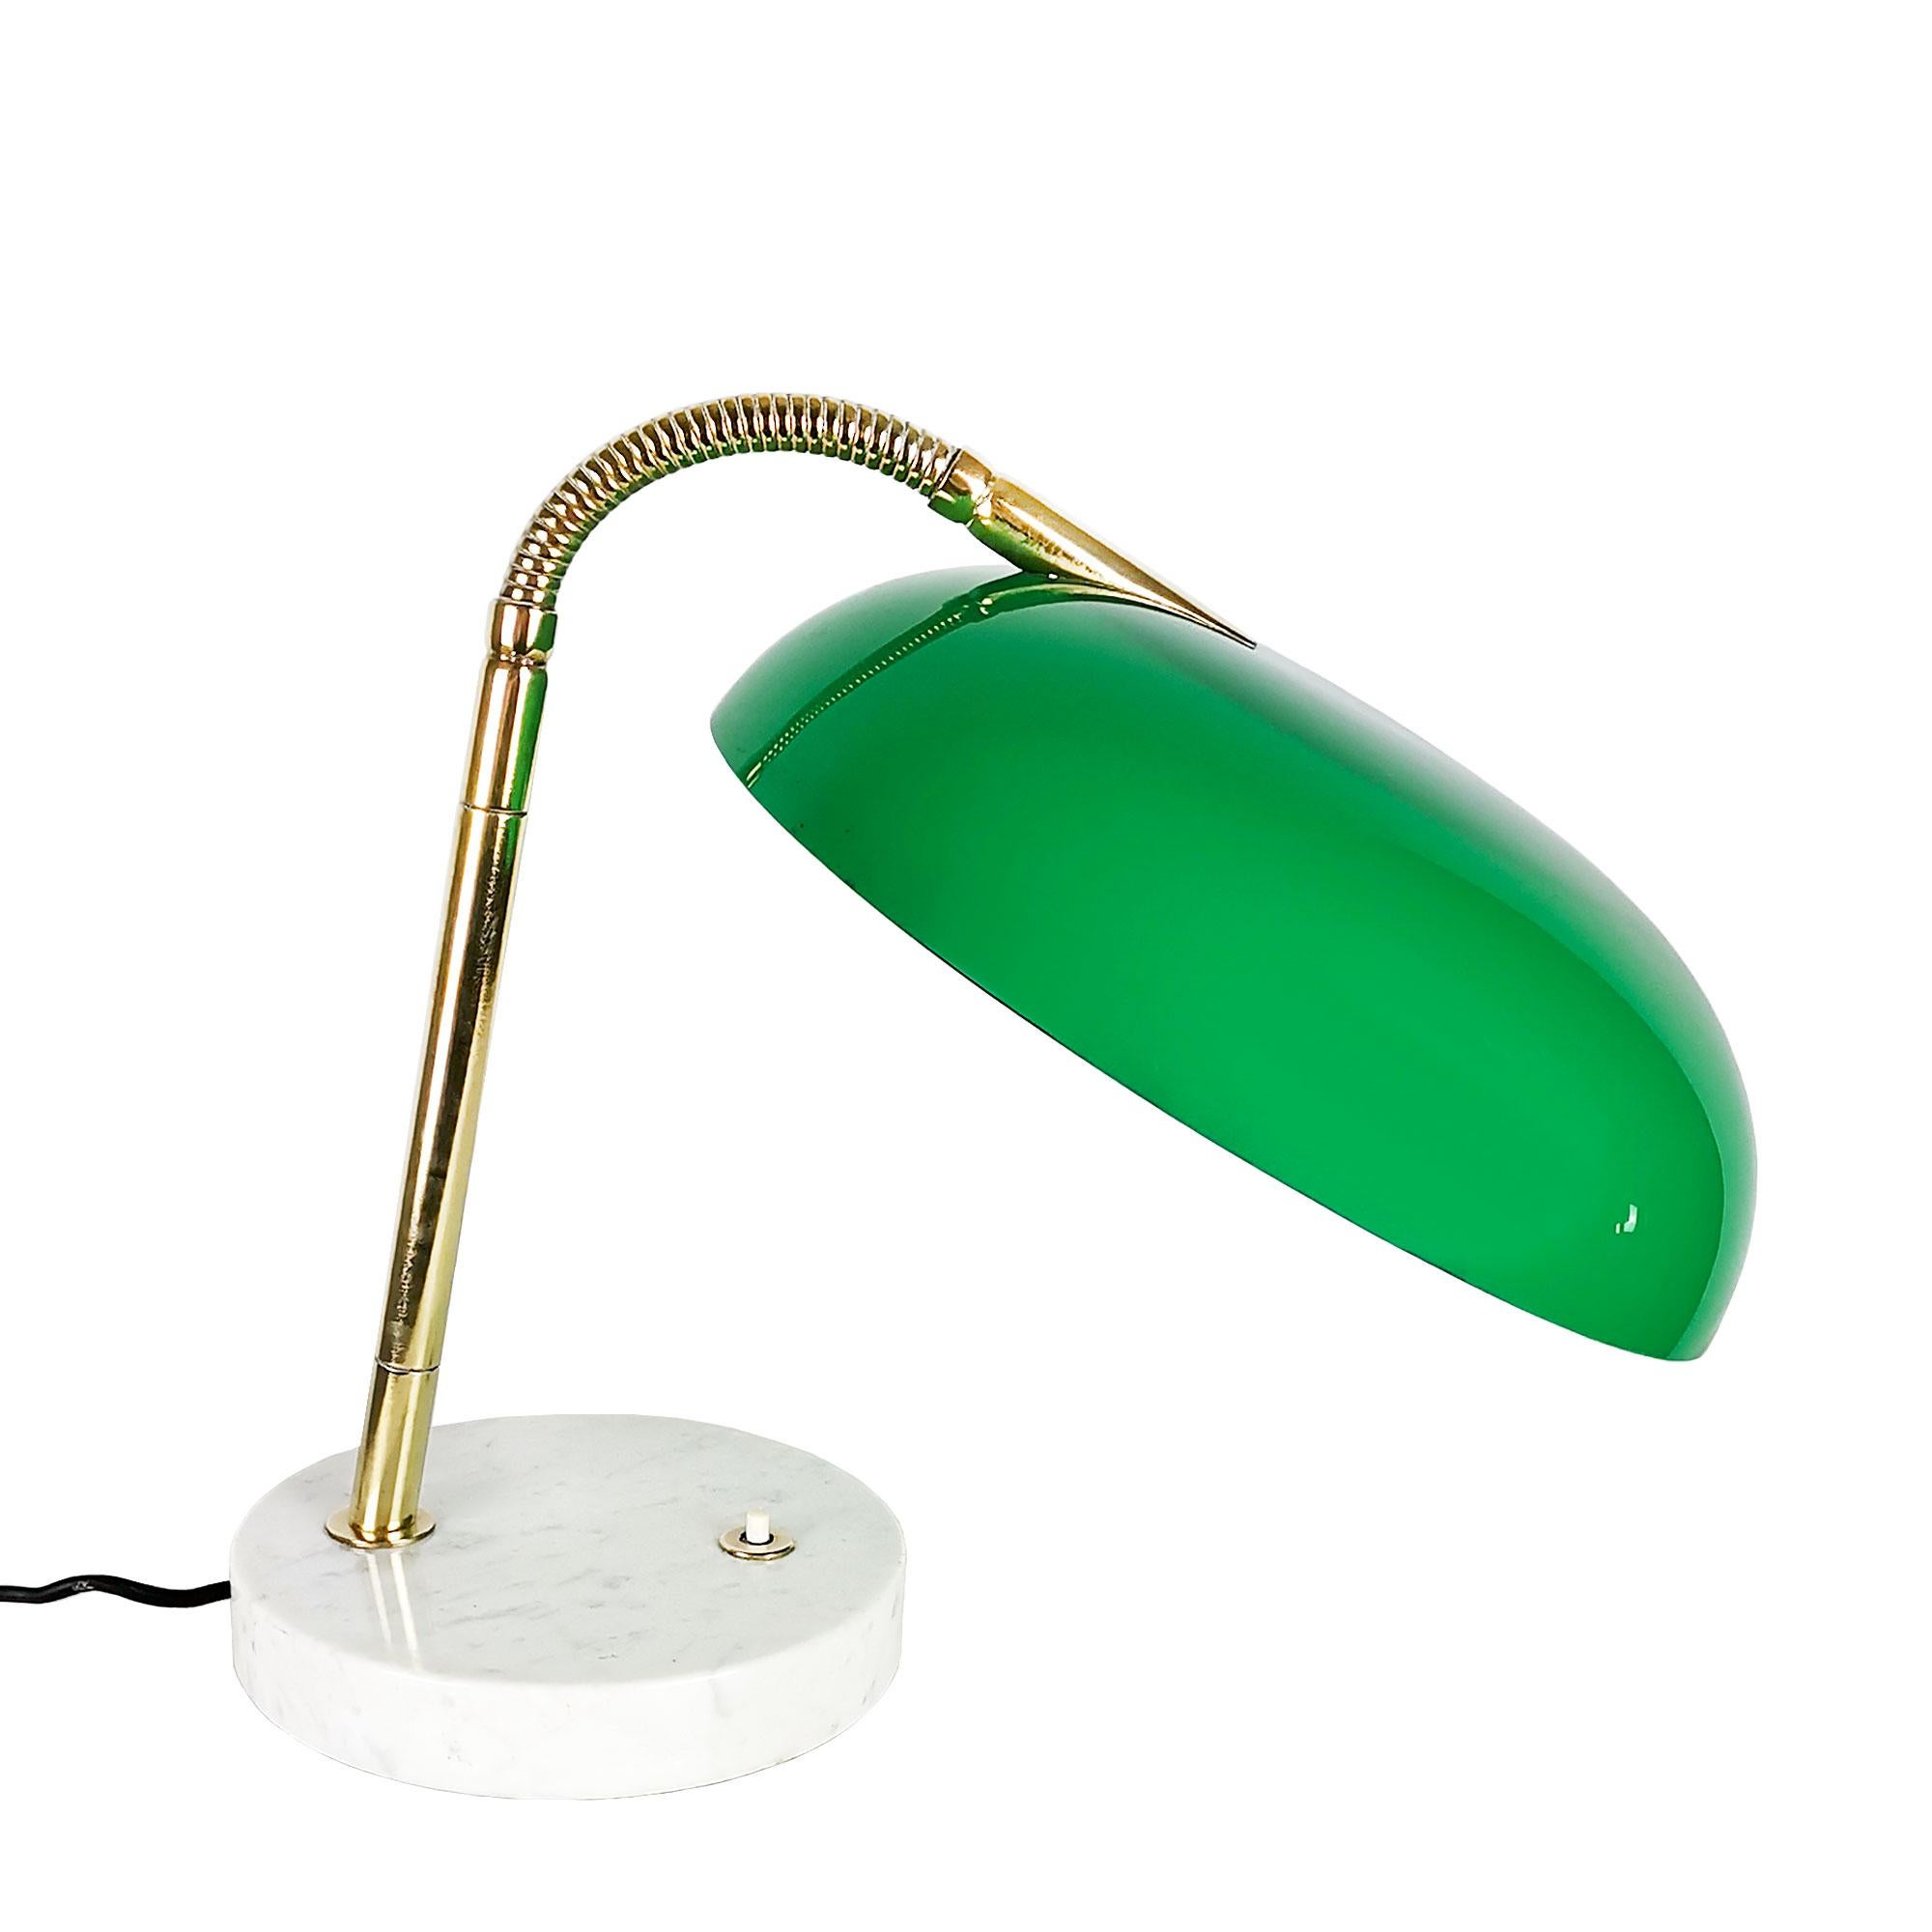 Adjustable desk lamp, white marble base and polished brass flexible arm, green translucent plastic lampshade.
Attributed to Stilnovo

Italy c. 1950

Maximum height: 62 cm.